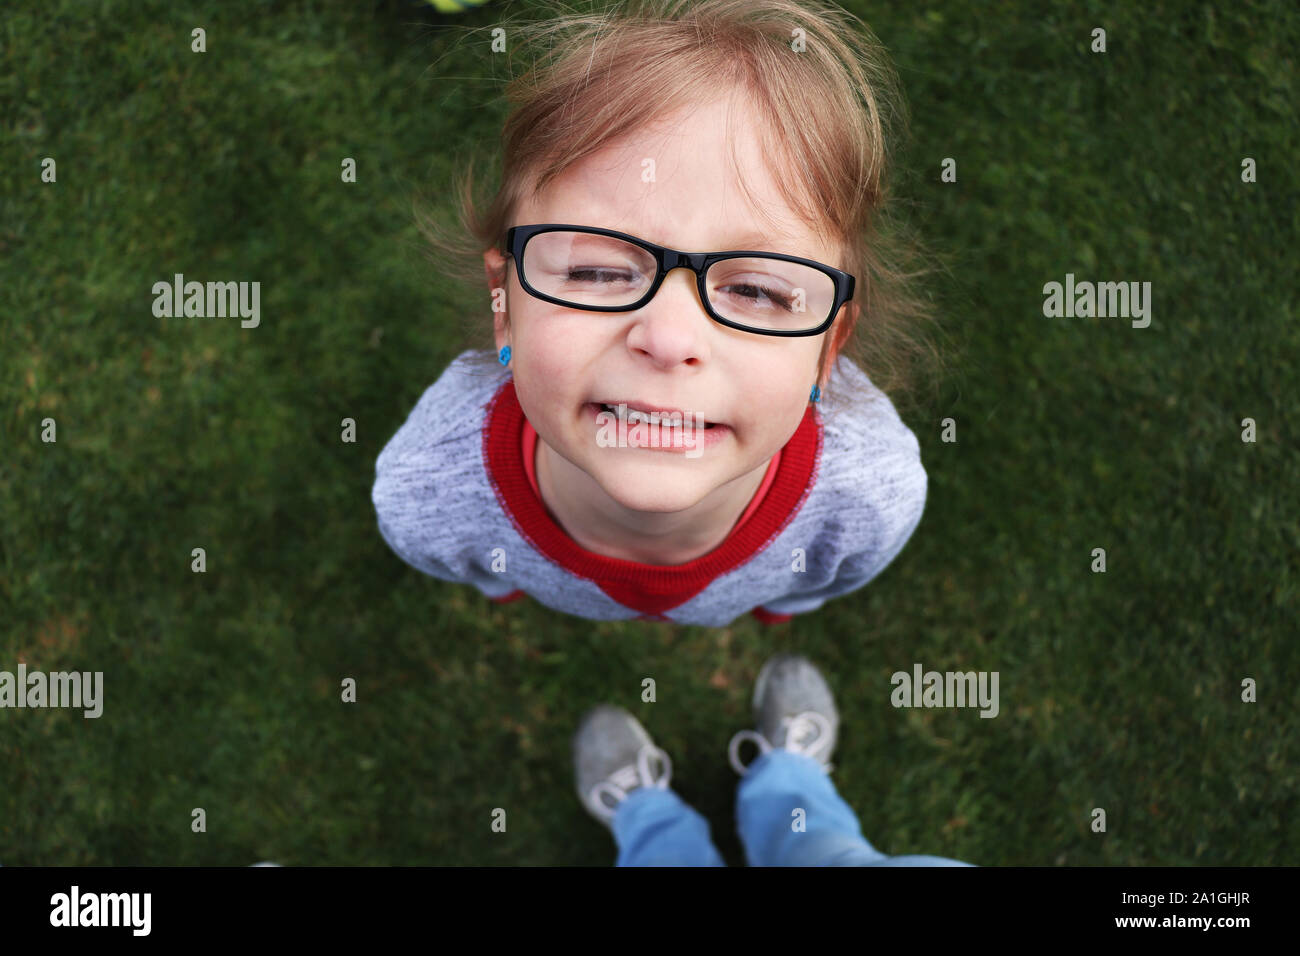 Child looking up with a silly facial expression Stock Photo